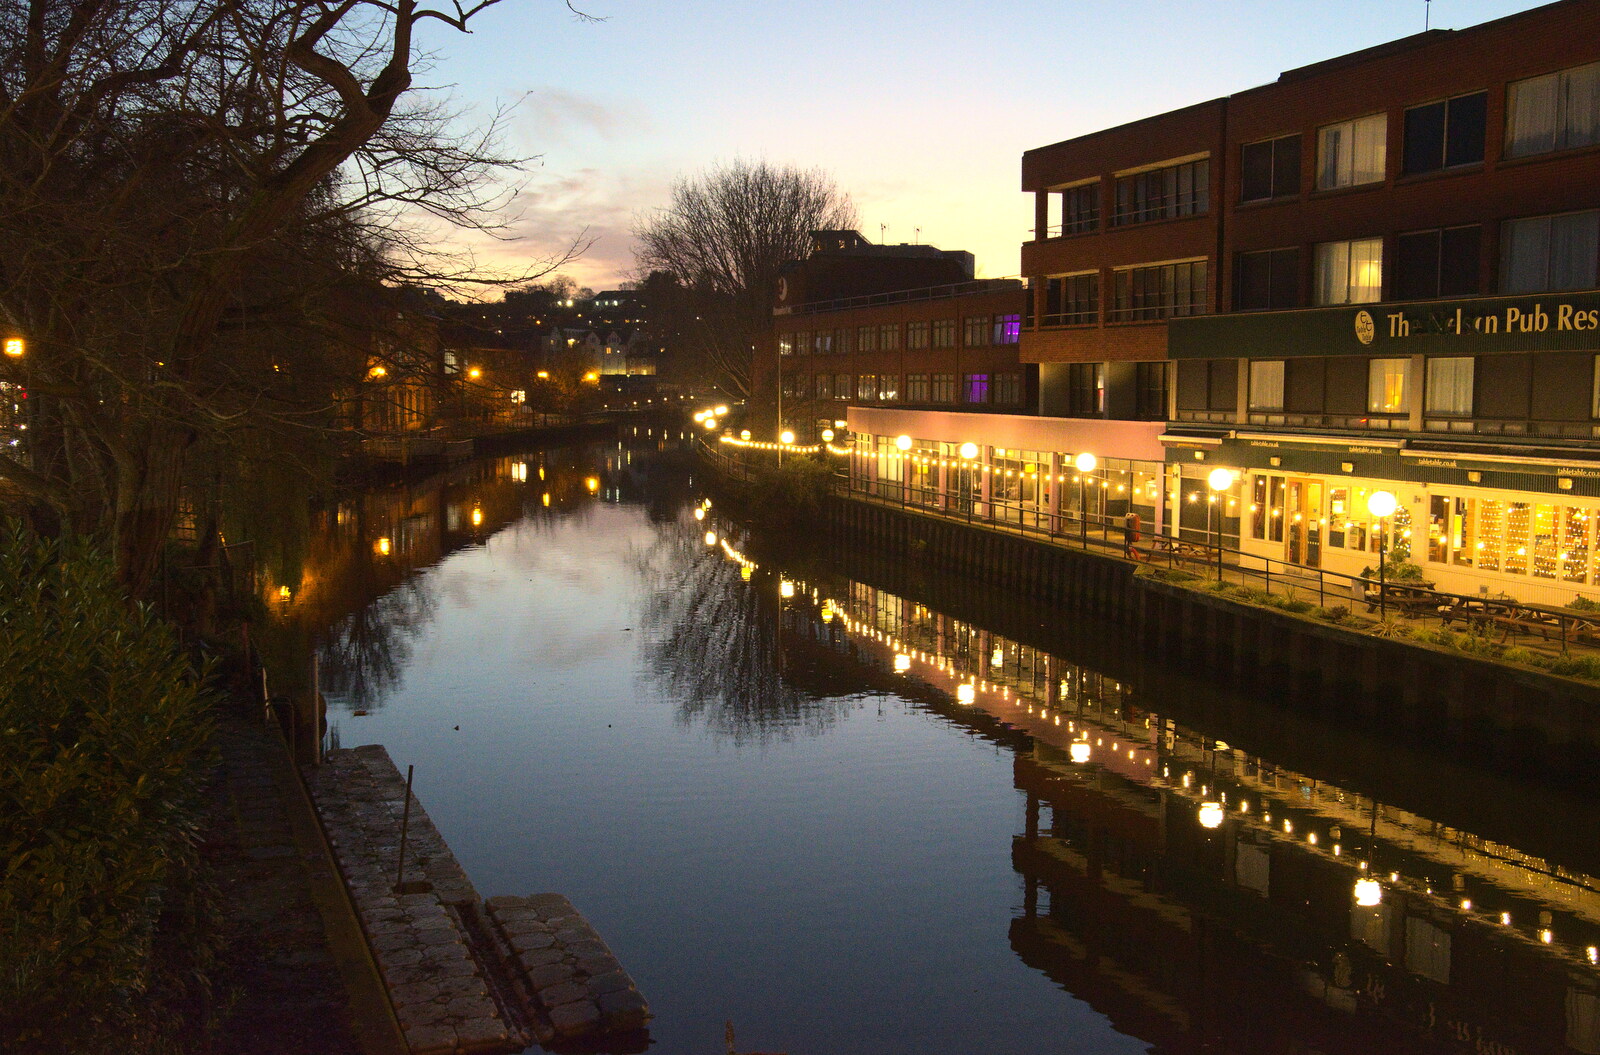 The River Wensum at sunset from Christmas Shopping in Norwich, Norfolk - 21st December 2022